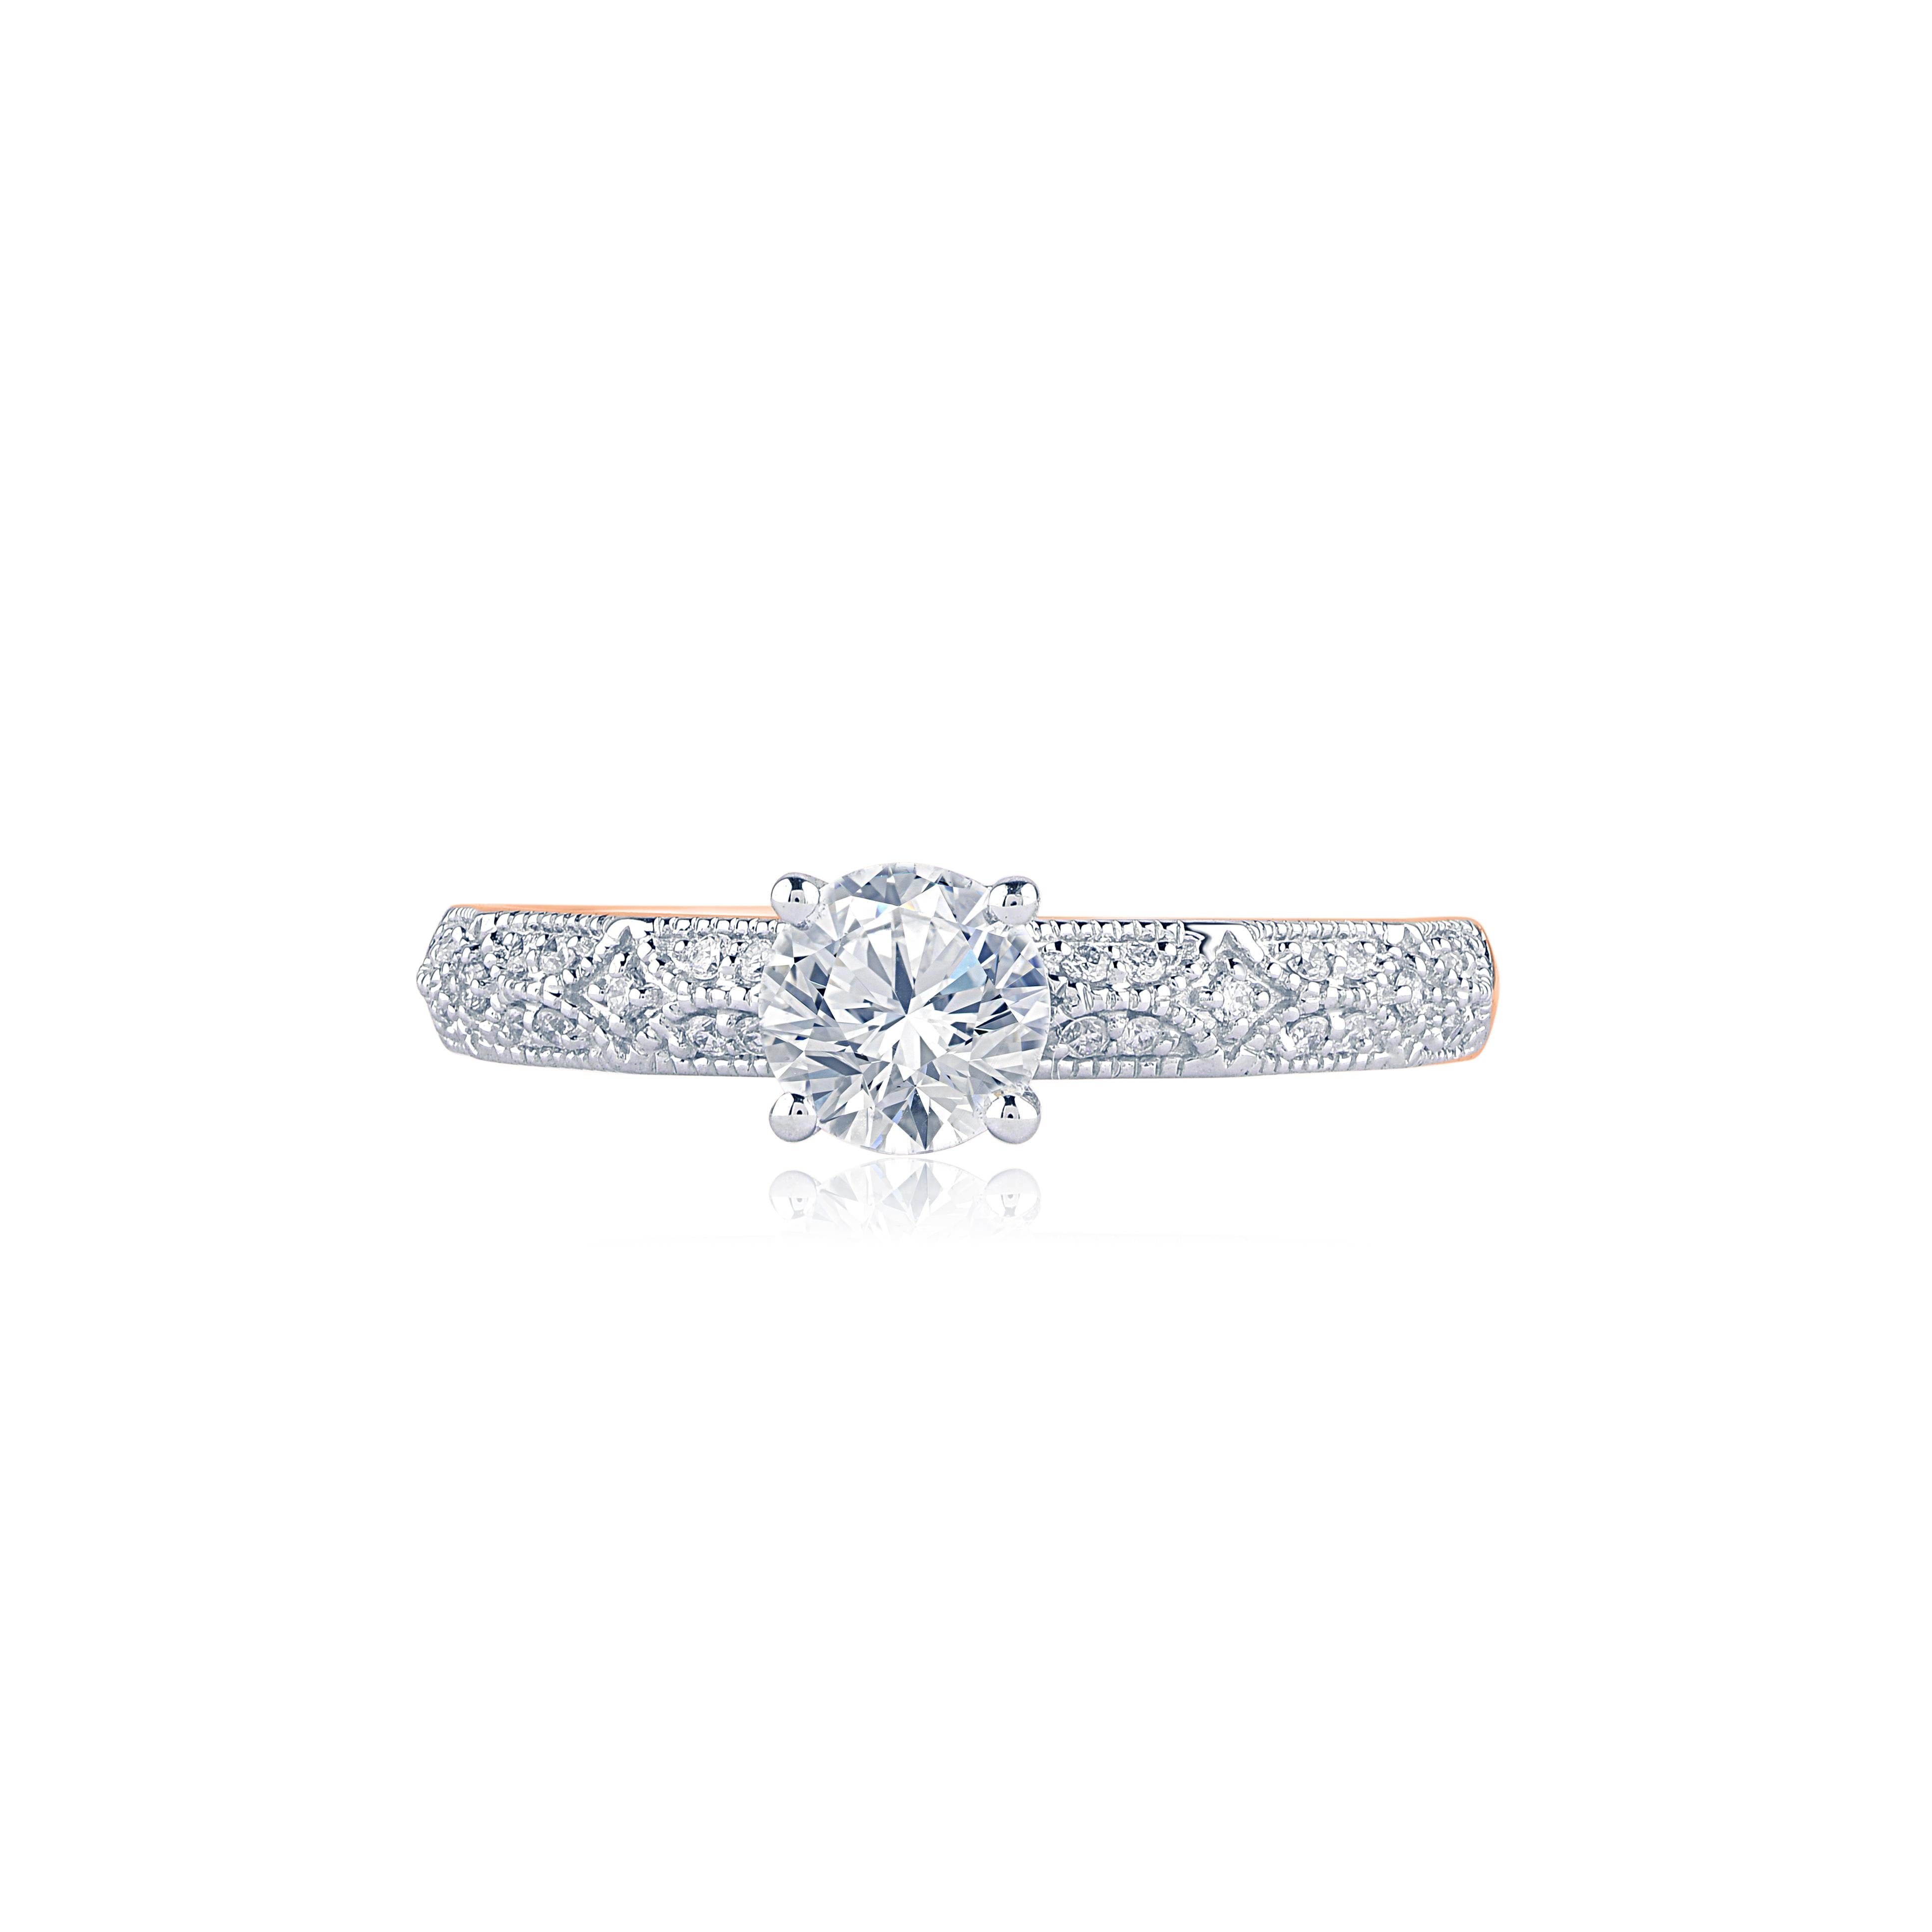 Truly exquisite, this diamond anniversary ring is sure to be admired for the inherent classic beauty and elegance within its design. These ring is crafted in 14KT white gold, and studded with 29 brilliant cut natural diamonds in prong setting. The